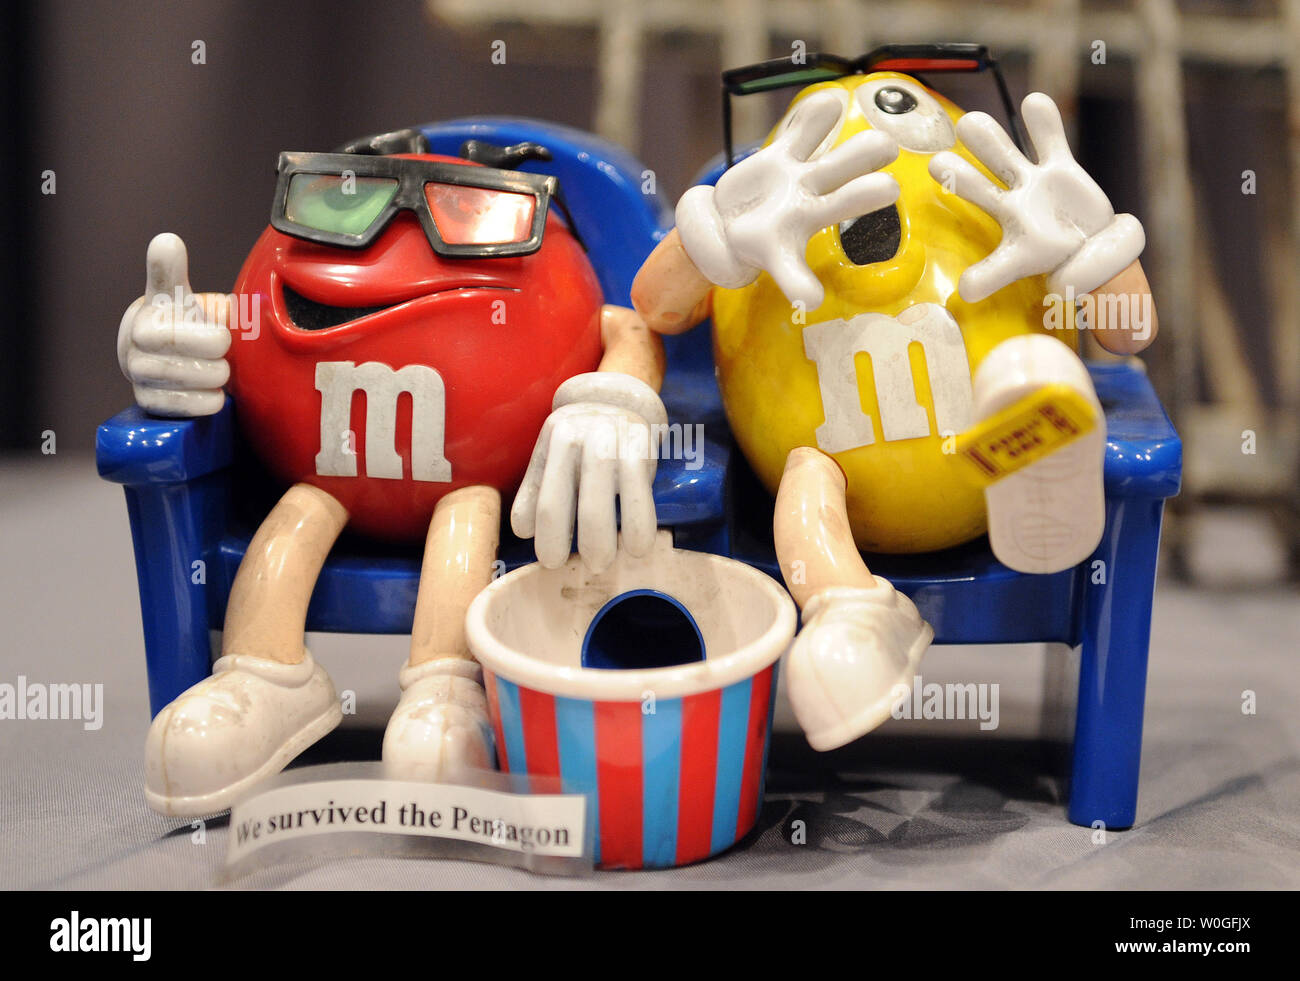 An M&Ms dispenser from the Pentagon is seen at the September 11:  Remembrance and Reflection exhibit at The Smithsonian Natural Museum of  American History on September 1, 2011, in Washington, DC. More